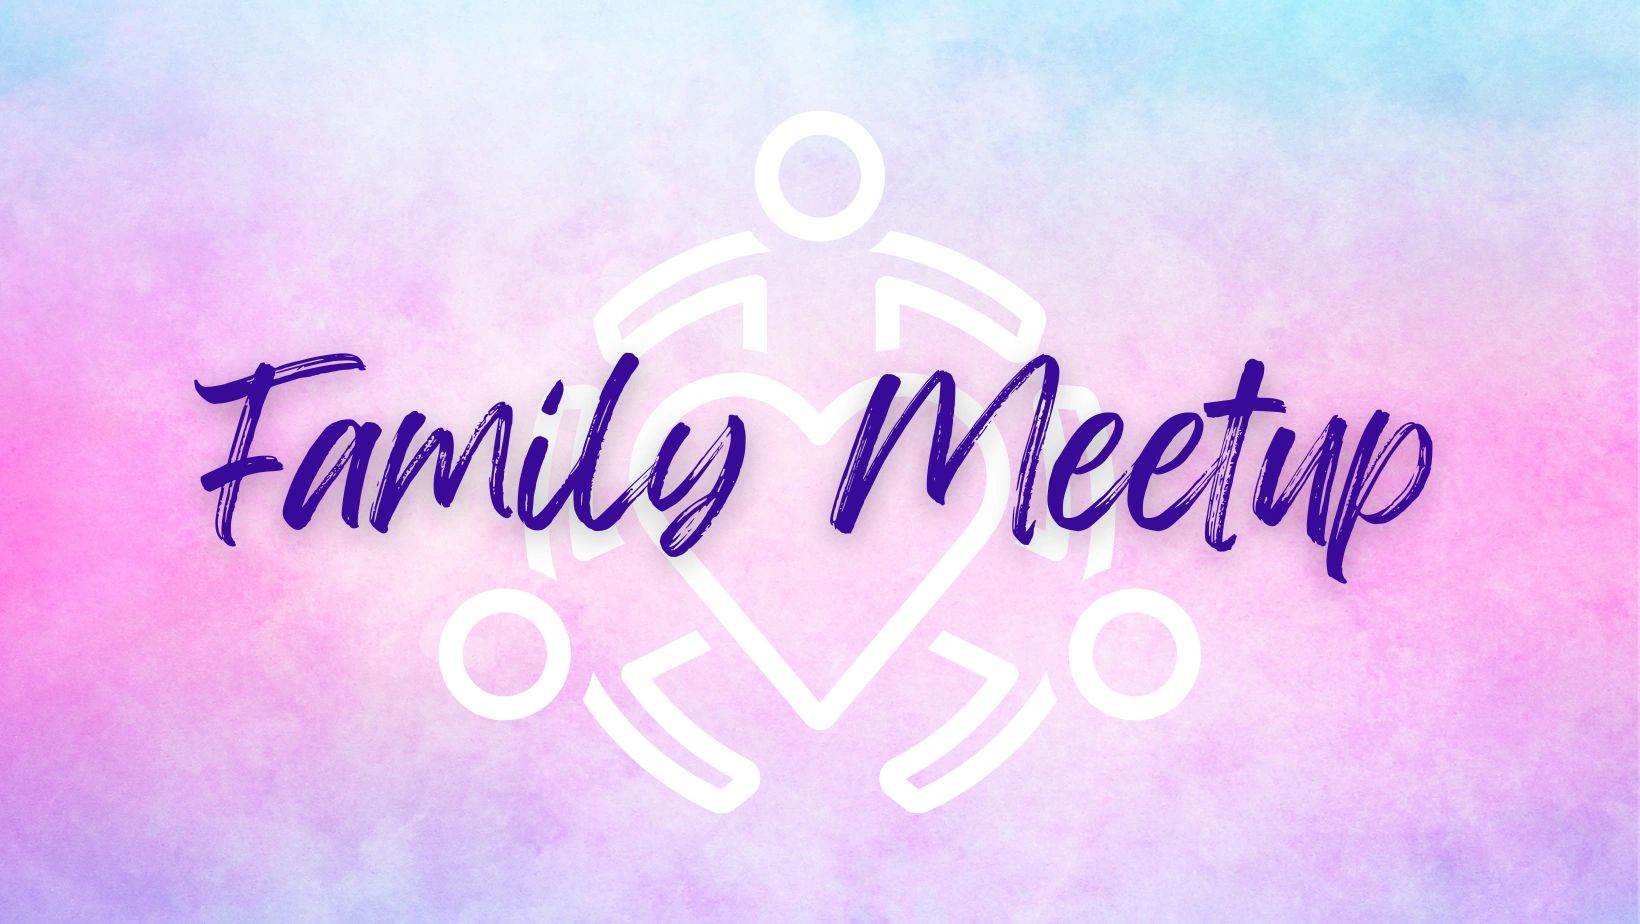 The words Family Meetup overlay a graphic of people surrounding a heart.